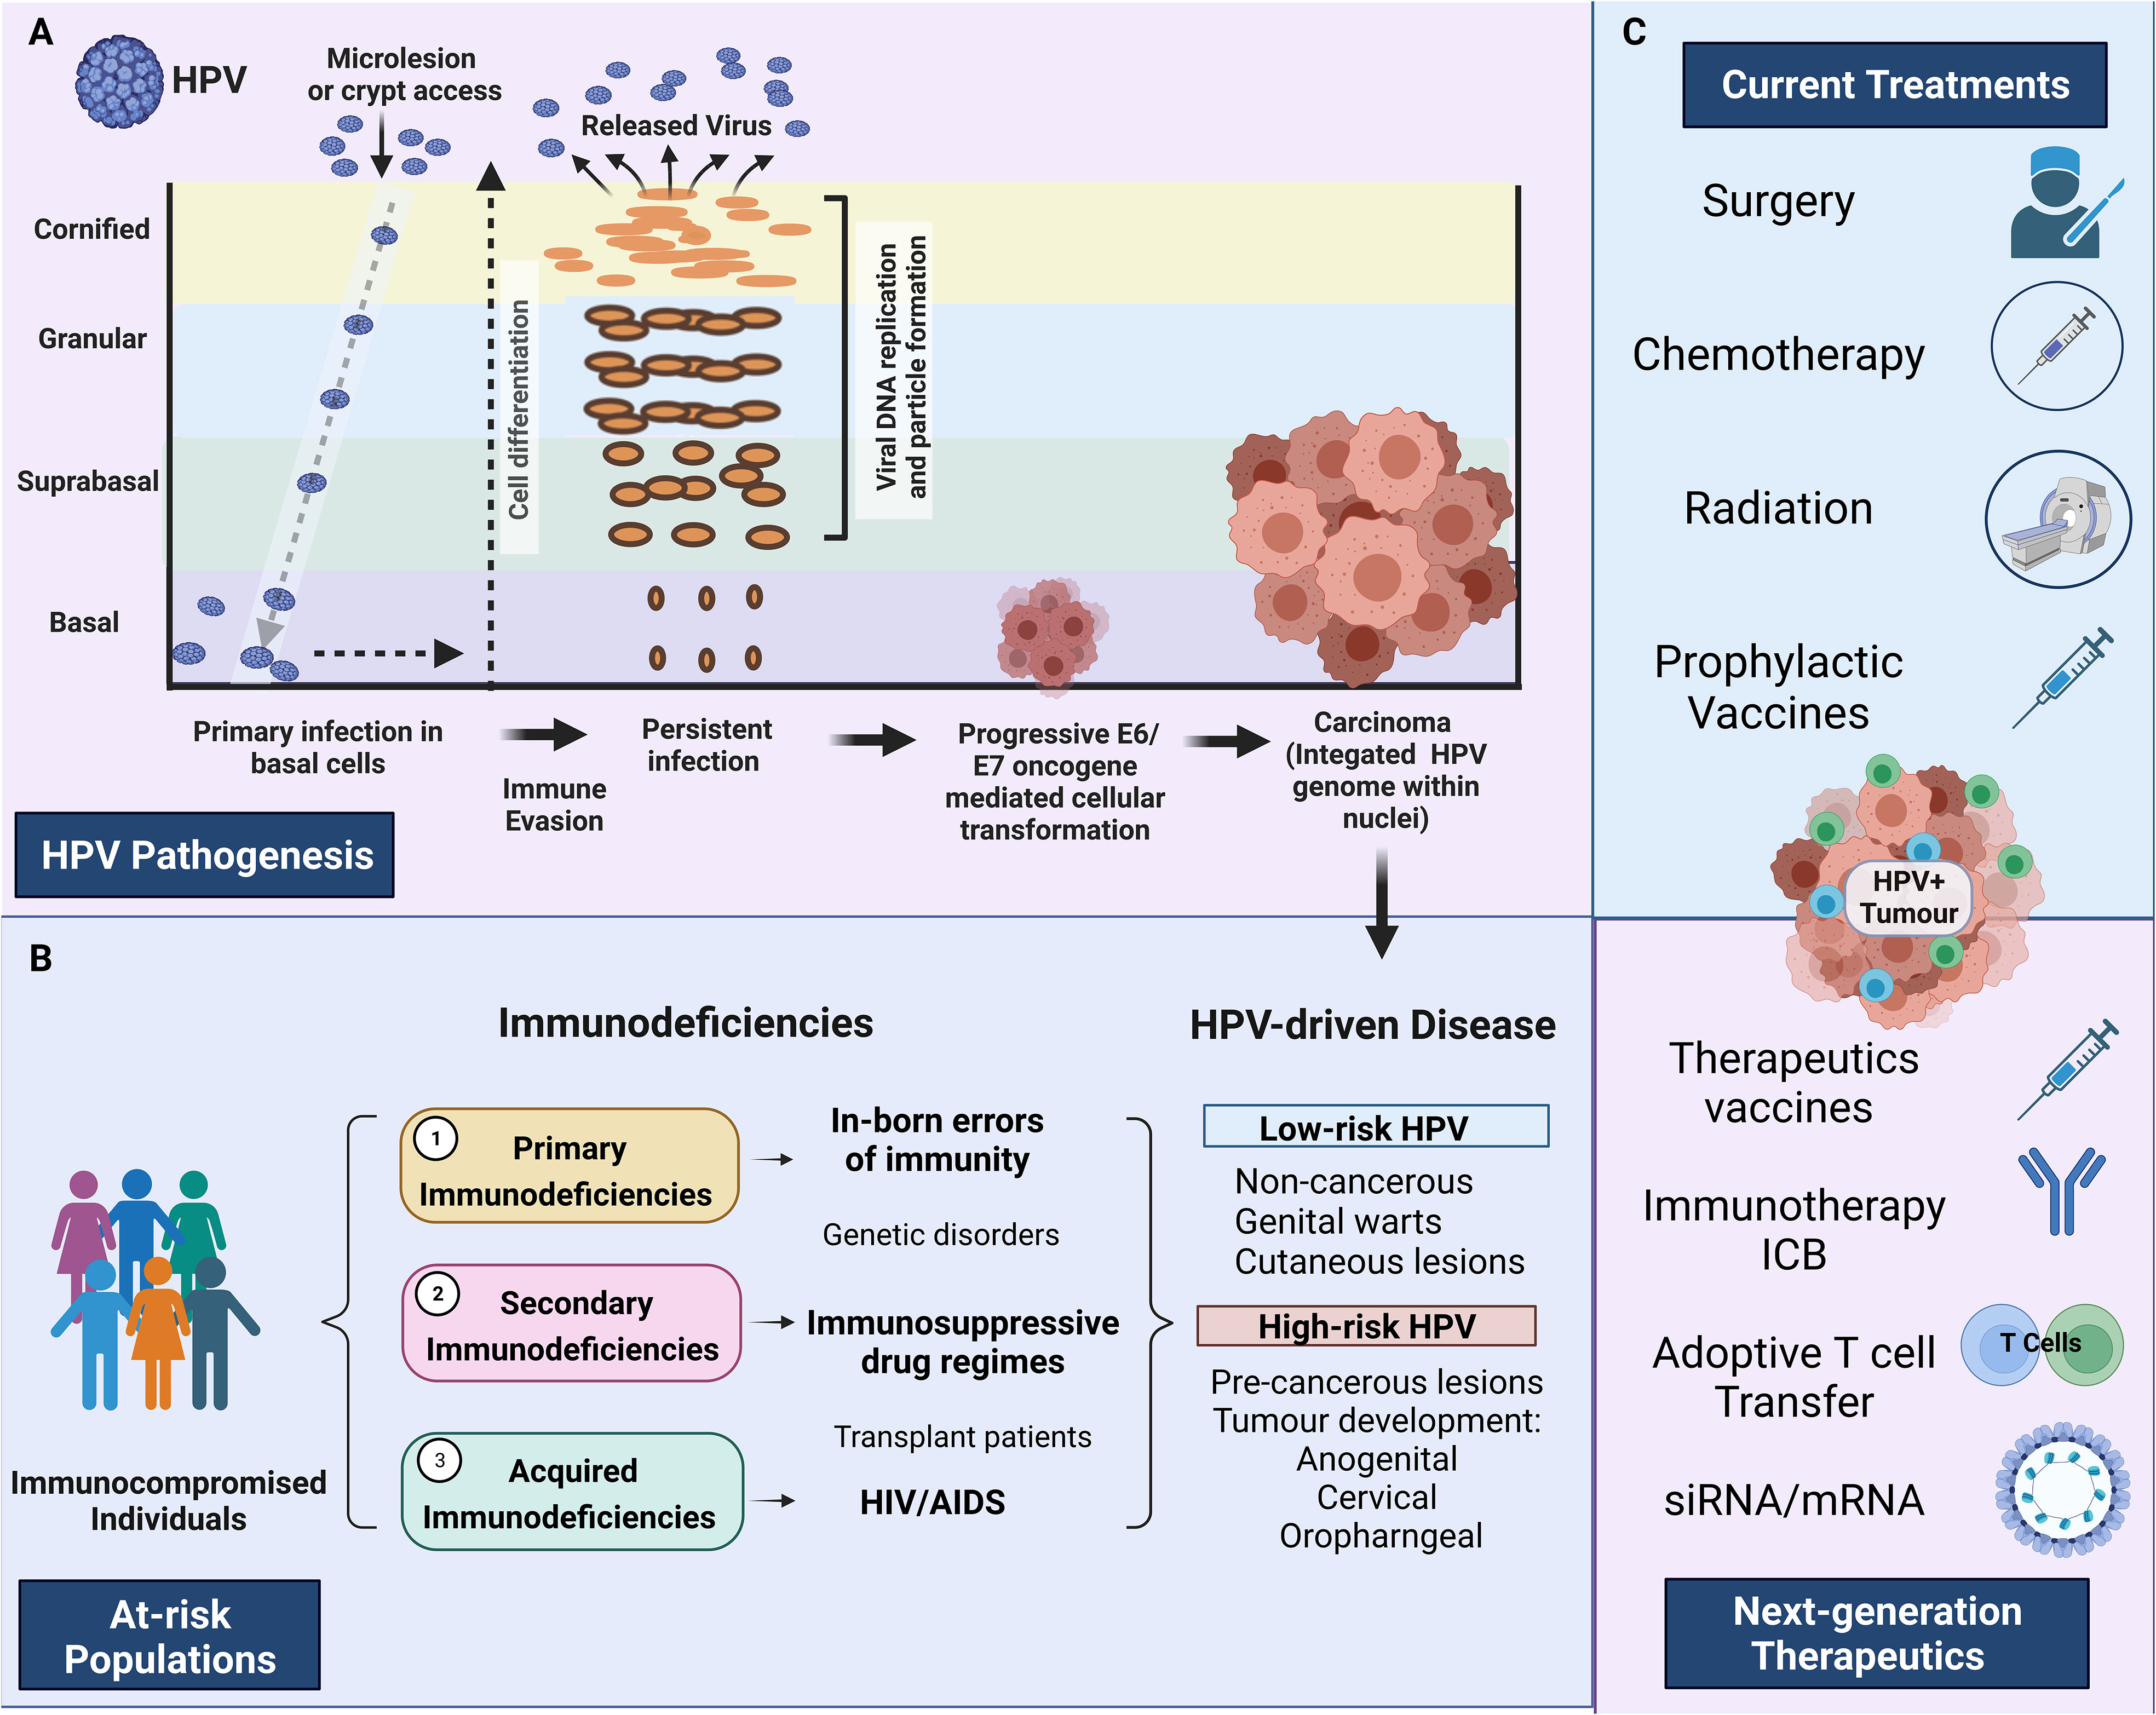 Frontiers Human papillomavirus in the setting of immunodeficiency Pathogenesis and the emergence of next-generation therapies to reduce the high associated cancer risk image